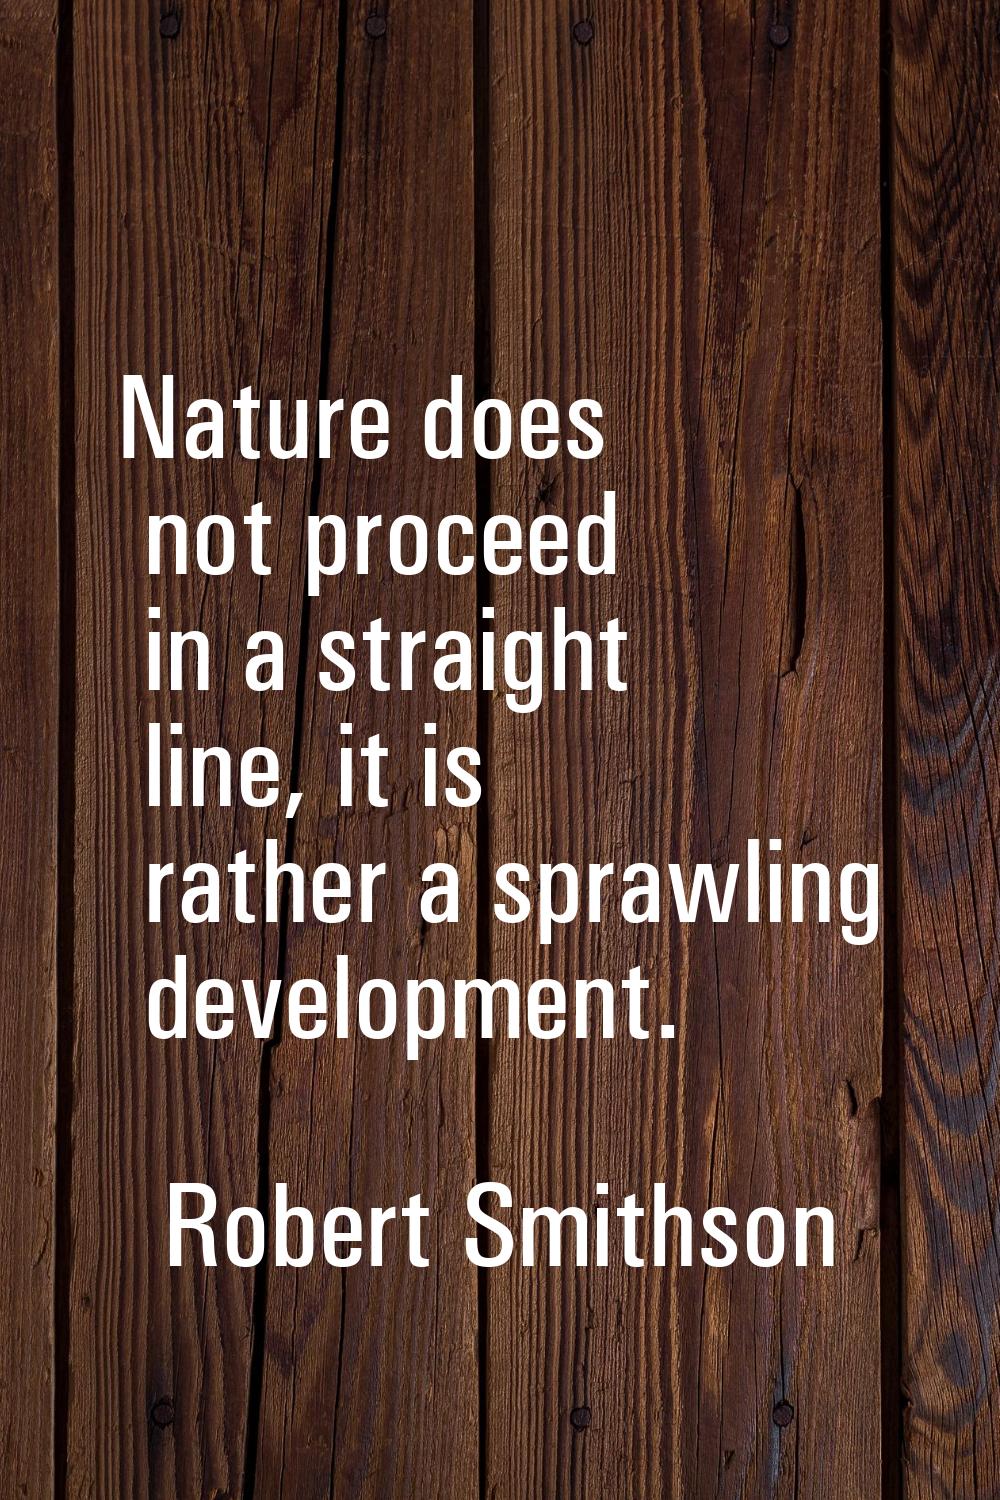 Nature does not proceed in a straight line, it is rather a sprawling development.